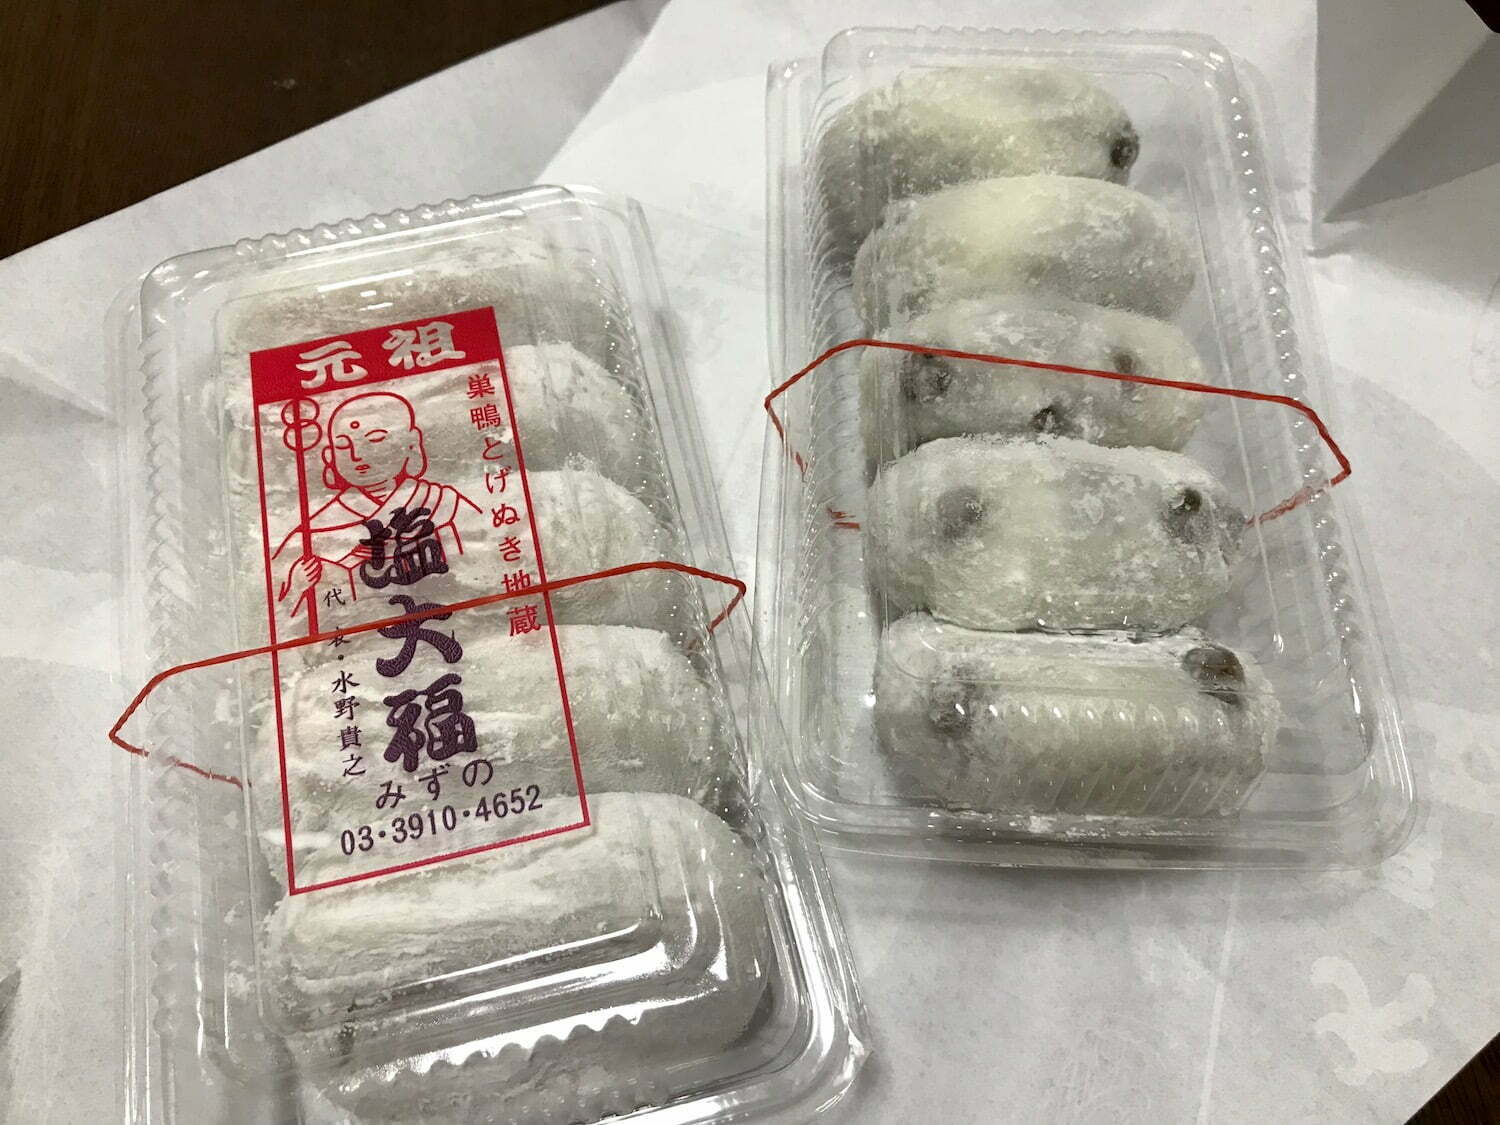 Daifuku consisting of a small round mochi (a glutinous rice cake) stuffed with a sweet filling, most commonly anko, (a sweetened red bean paste made from azuki beans).